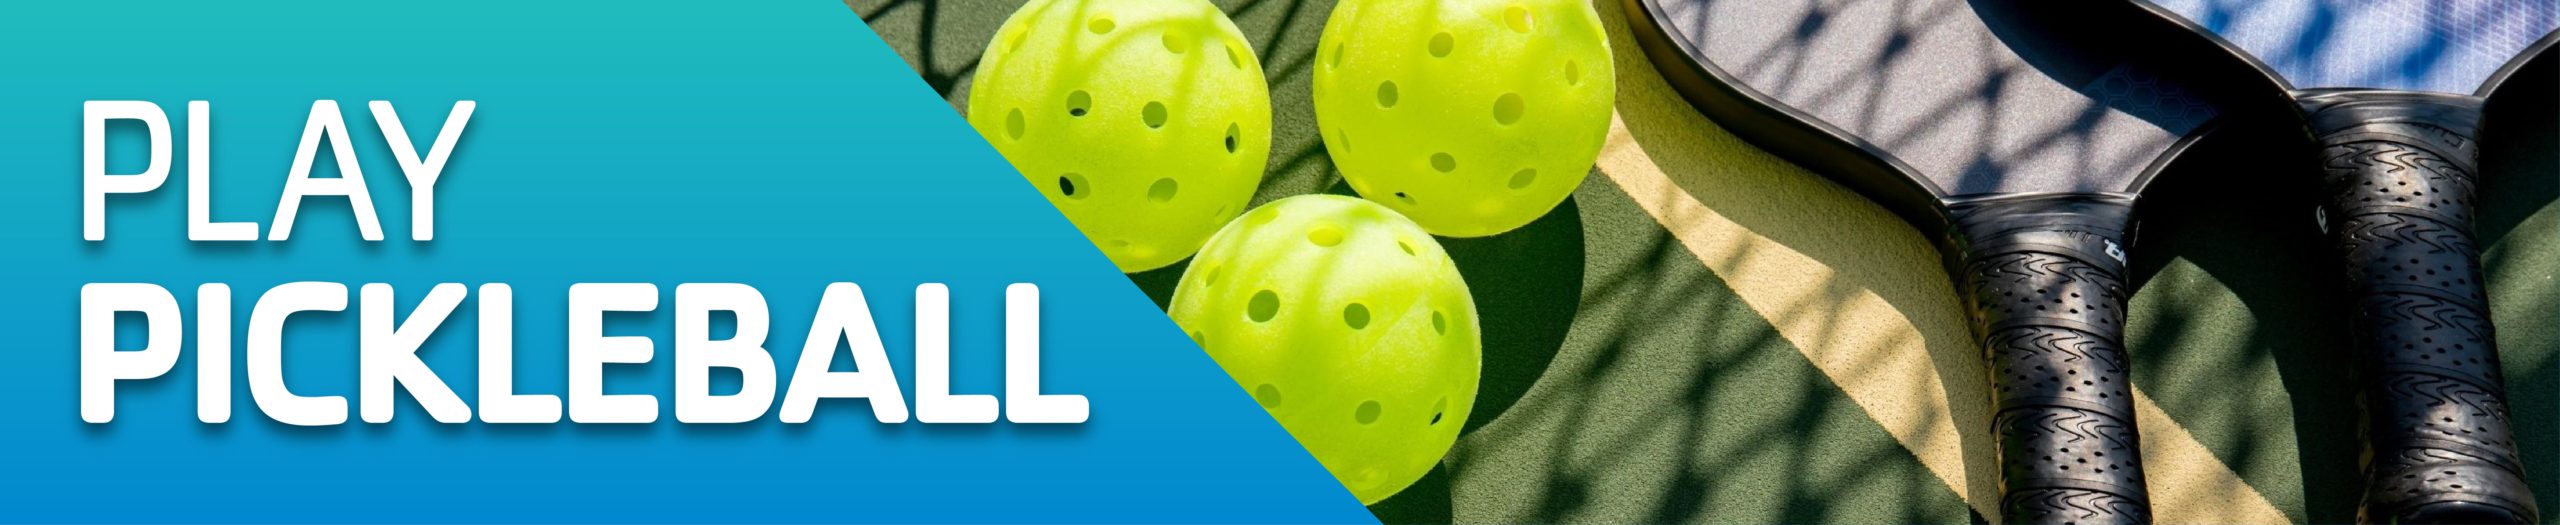 Pickleball at the Y! | YMCA DC